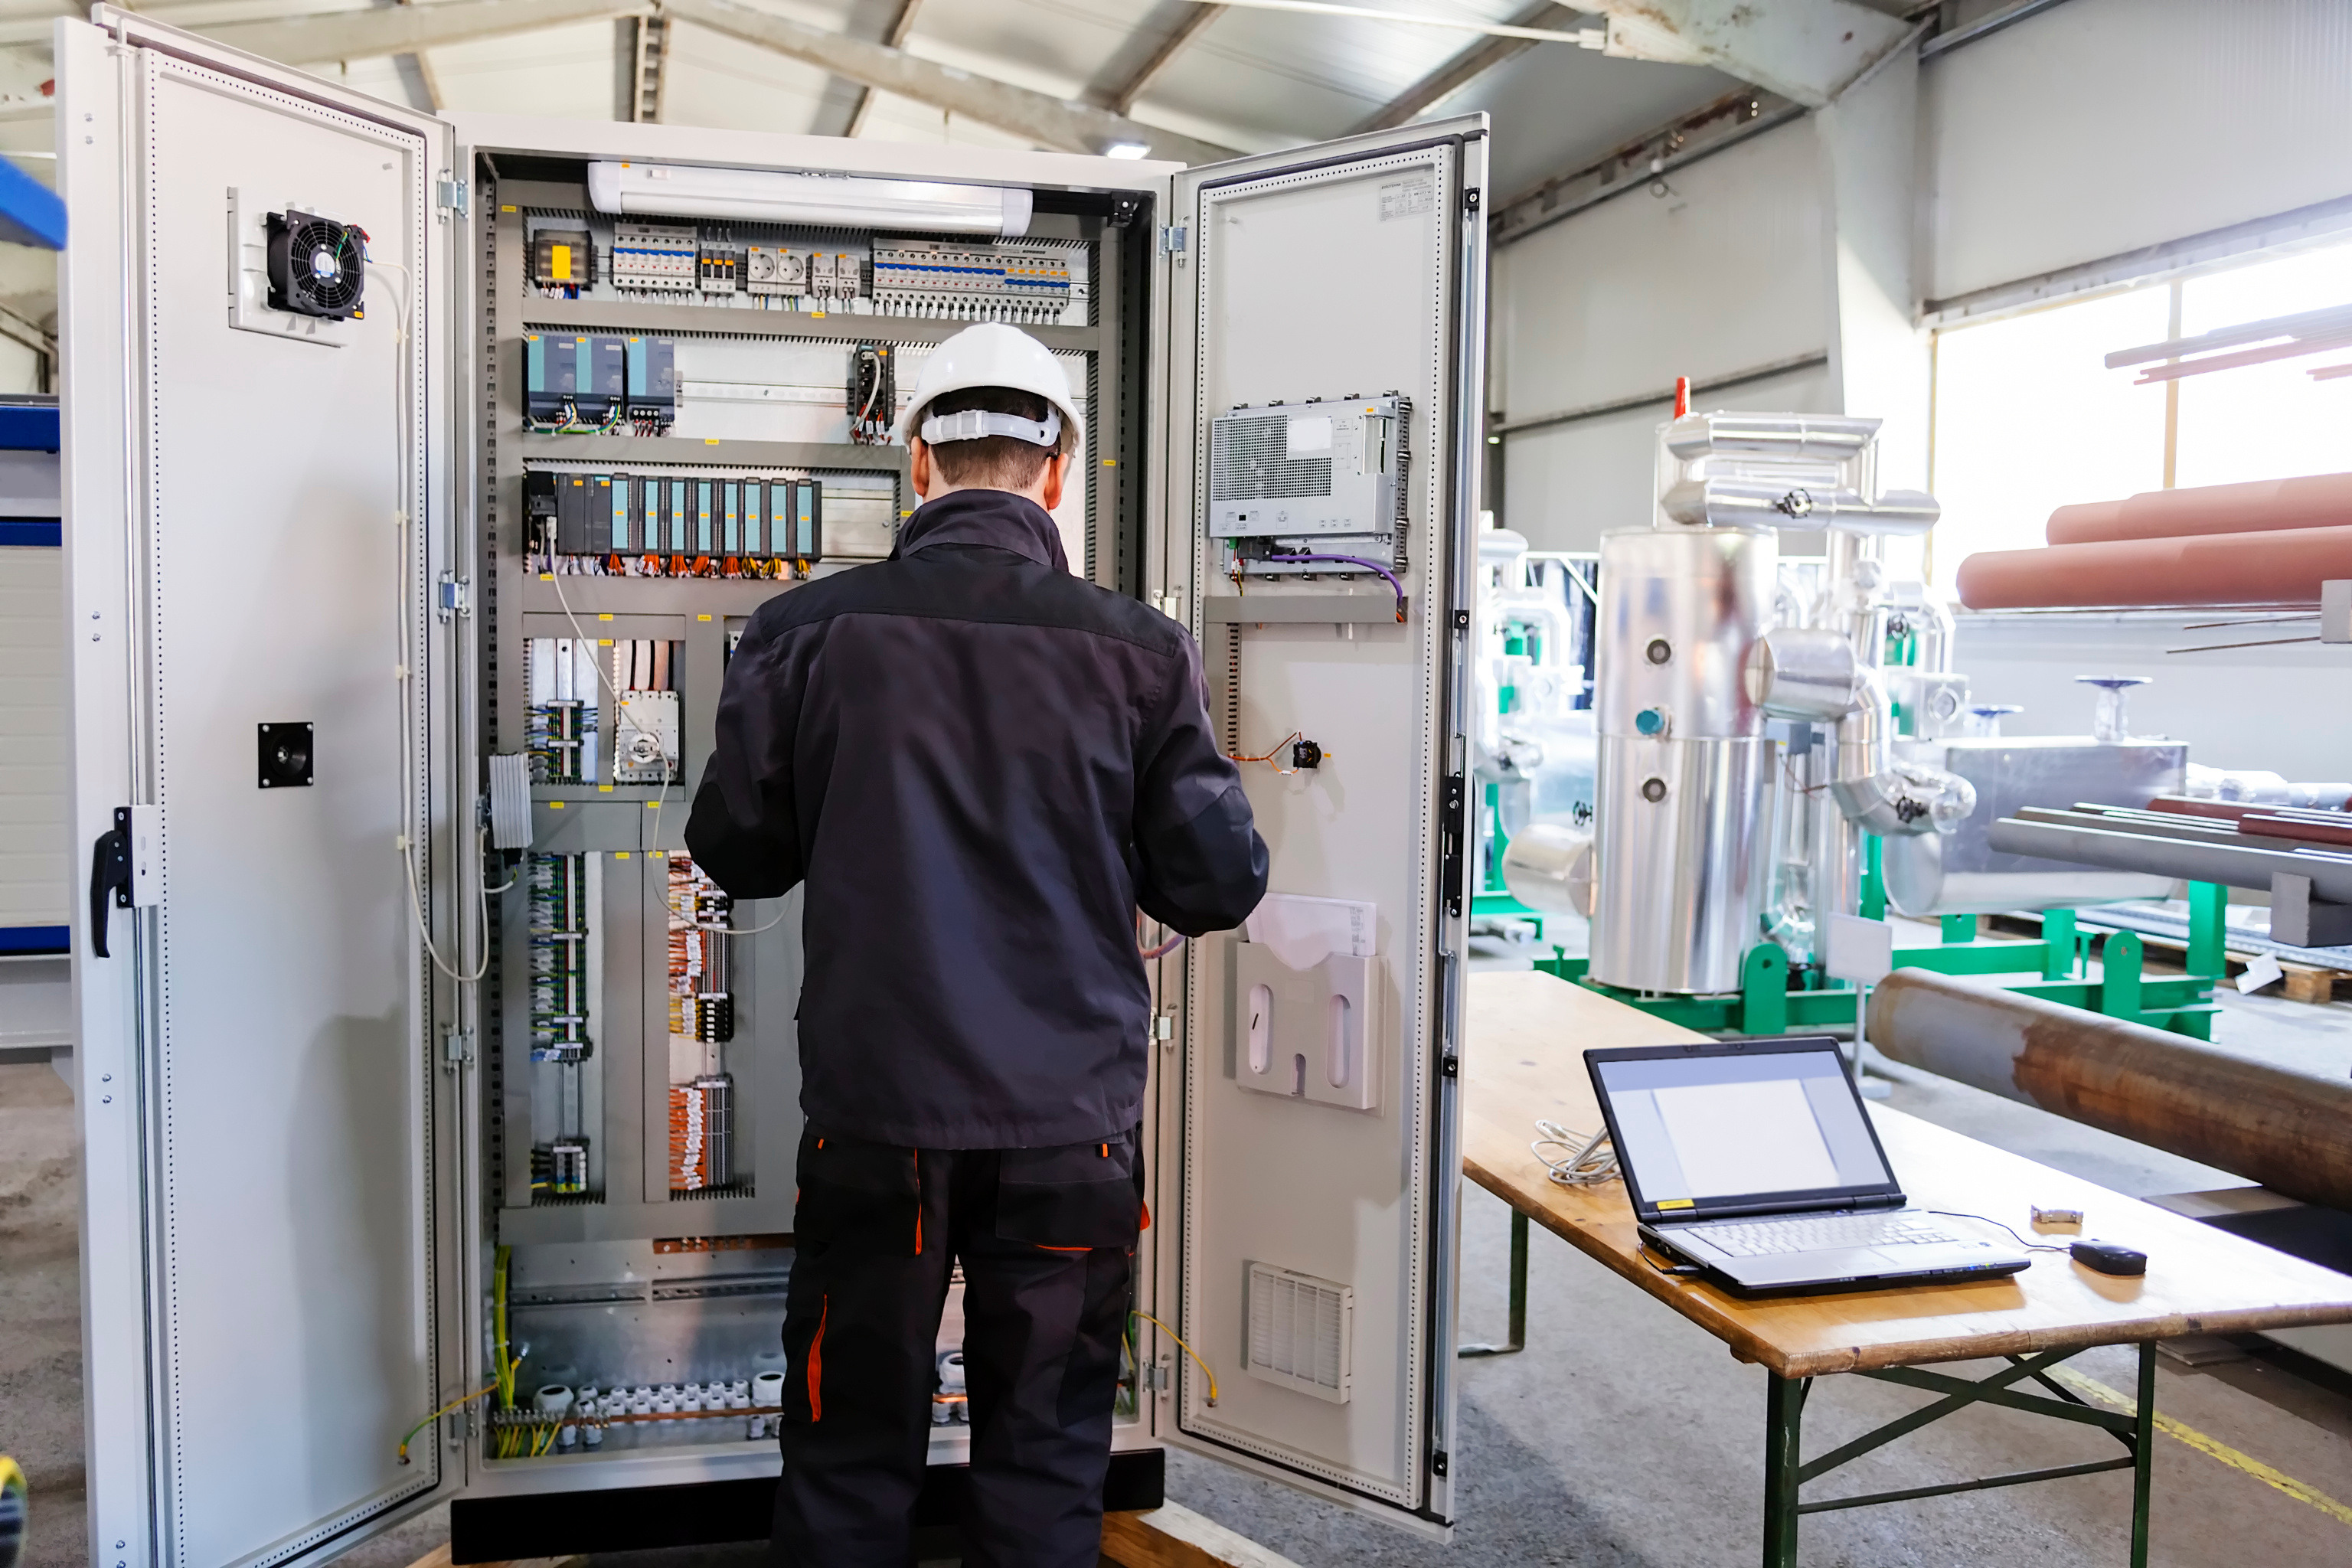 A panel builder works on a control panel